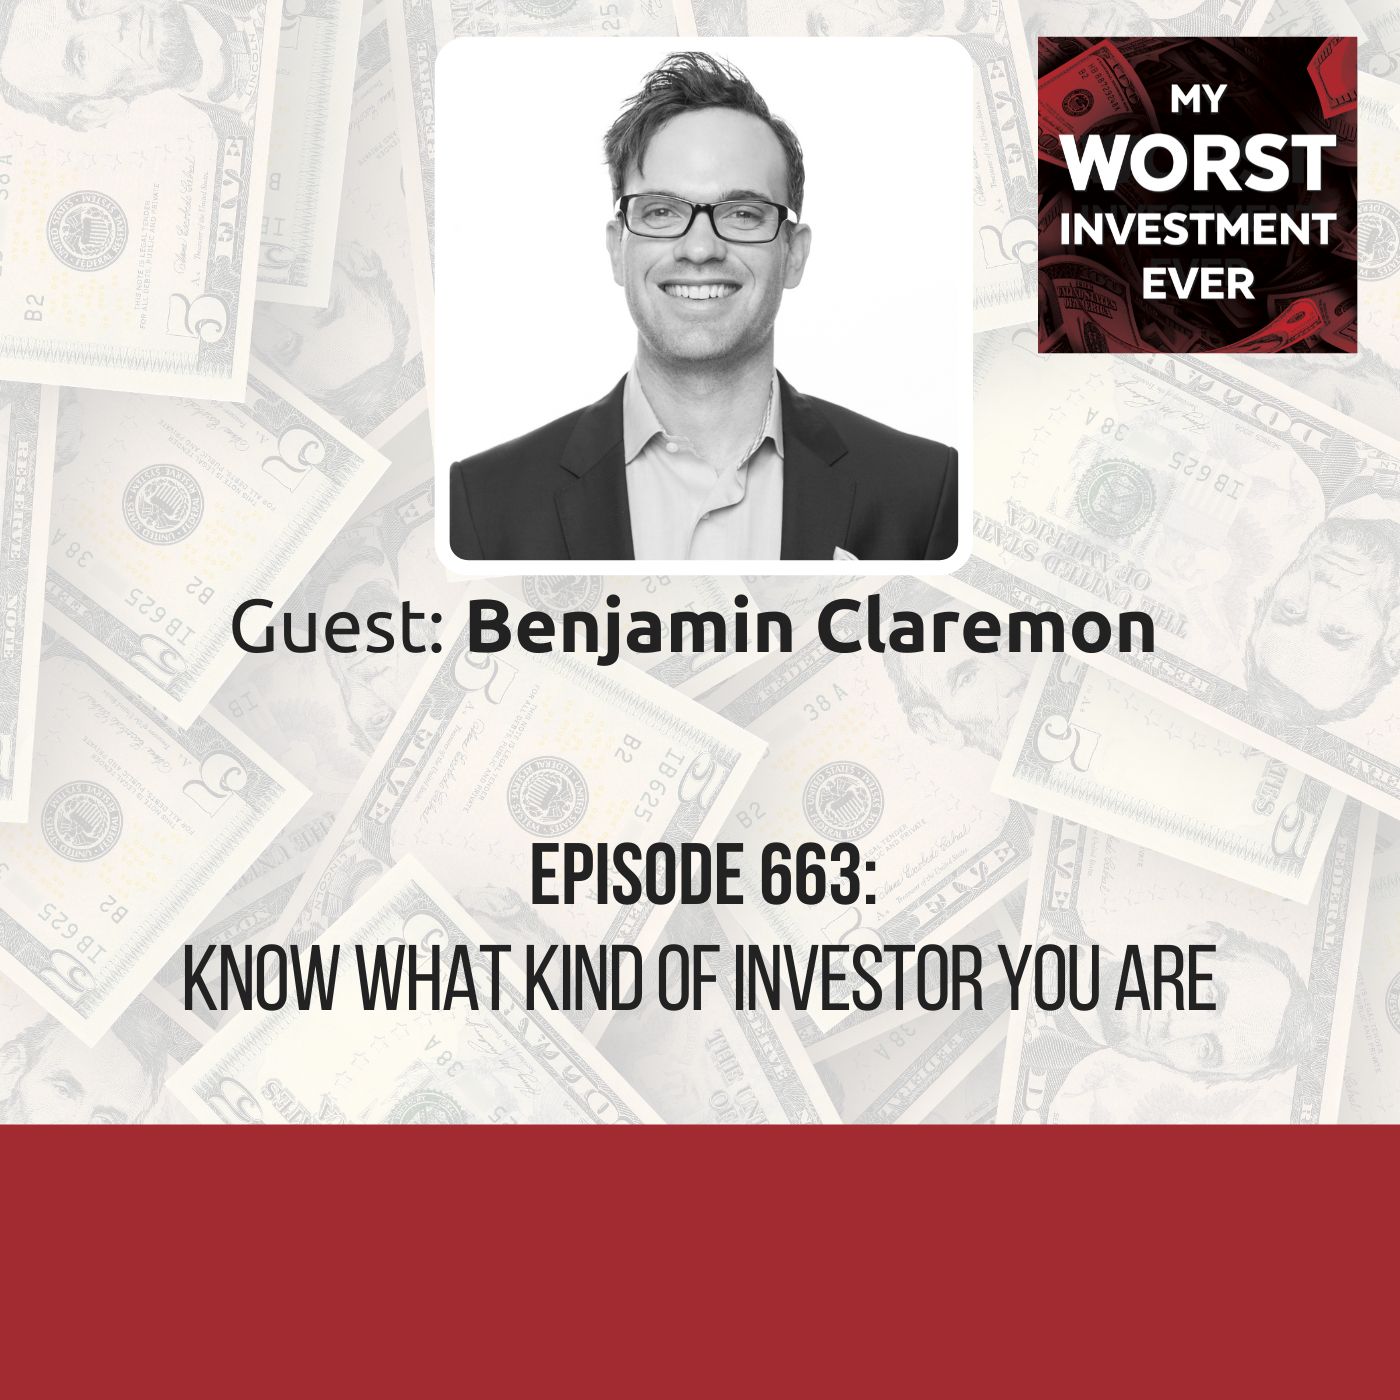 Benjamin Claremon – Know What Kind of Investor You Are